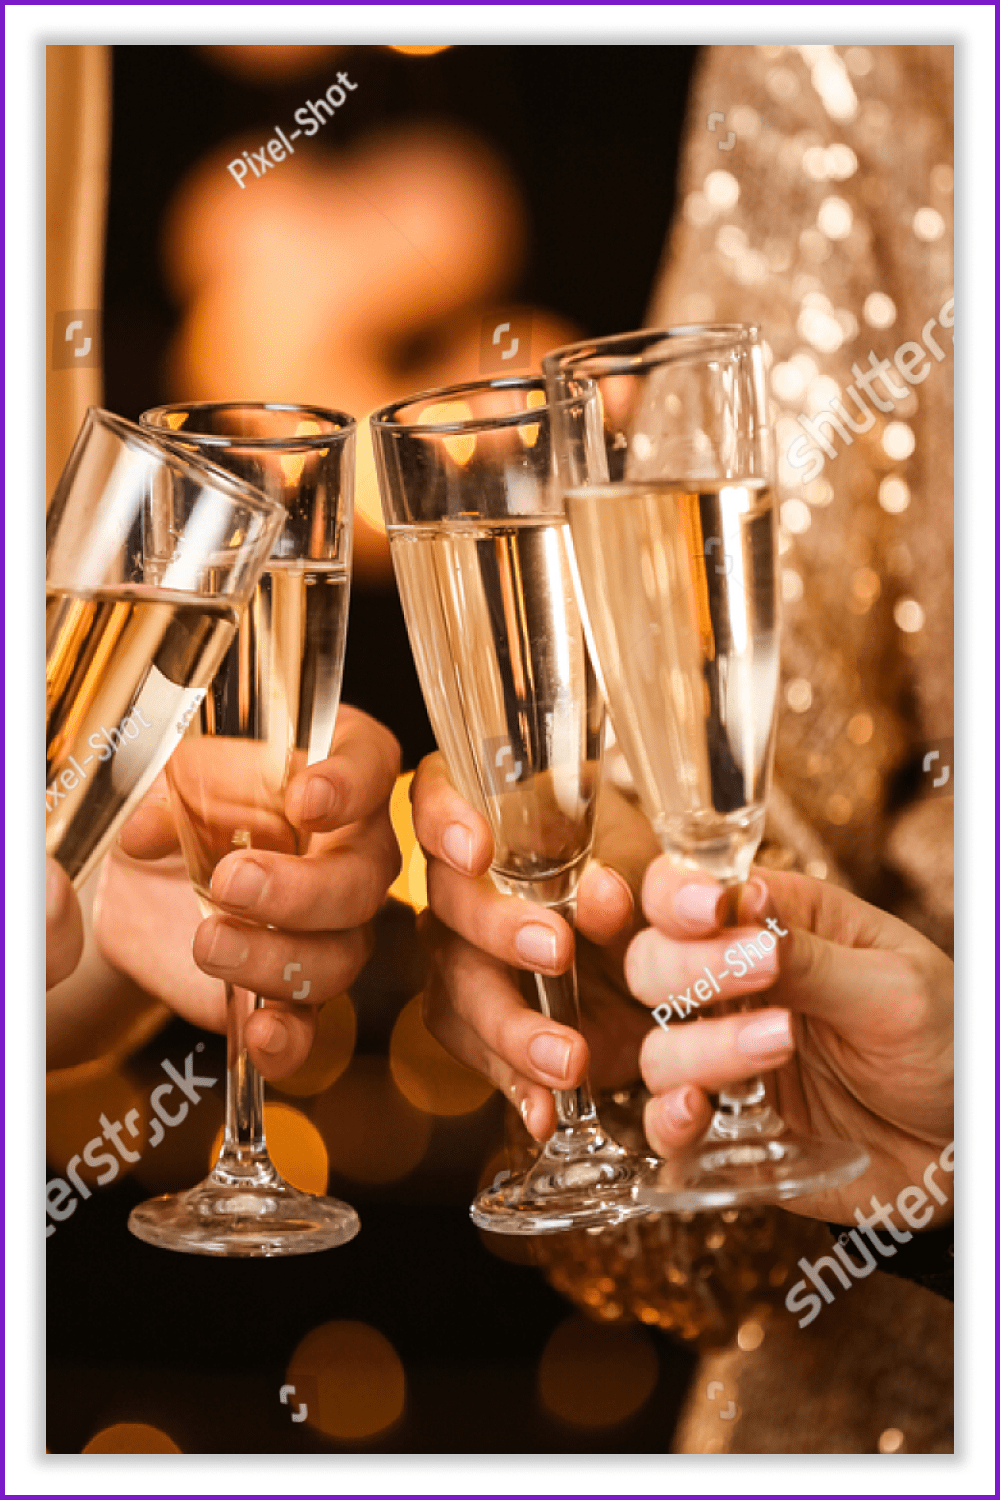 4 glasses of champagne in the hands of girls.